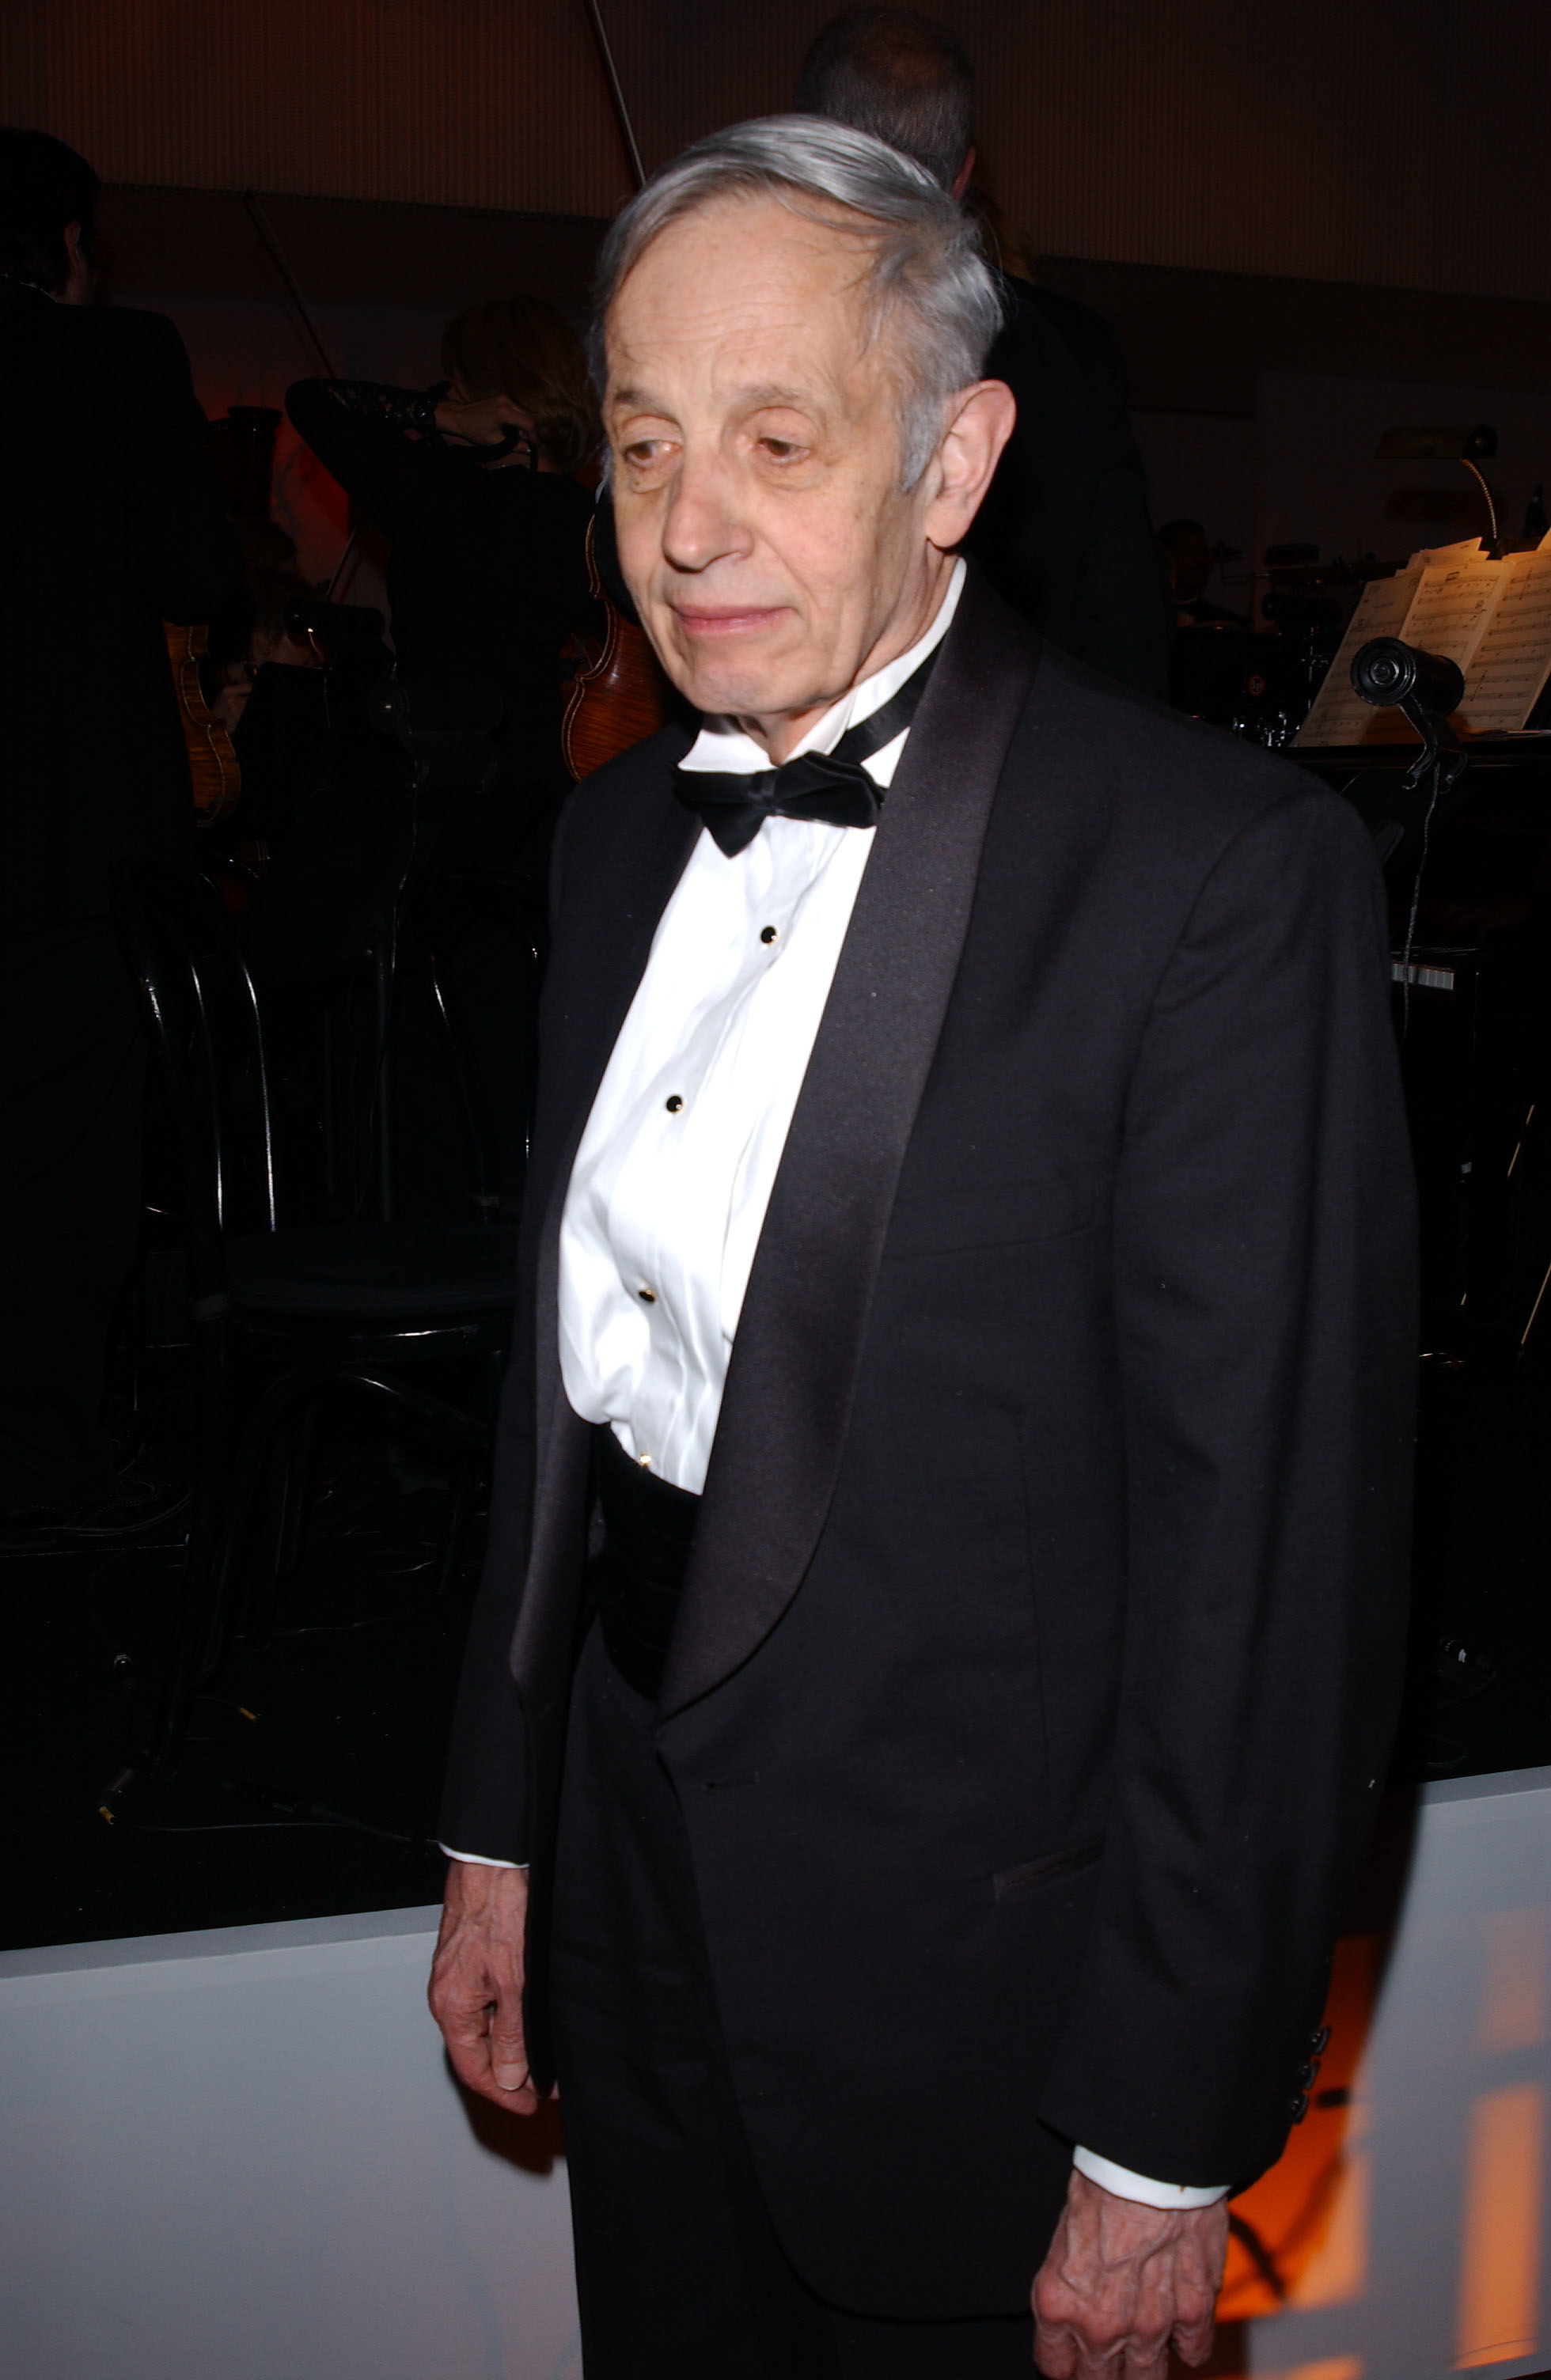 John Nash in a suit and bow tie at the Governors Ball following the 74th Annual Academy Awards at the Kodak Theater in Hollywood